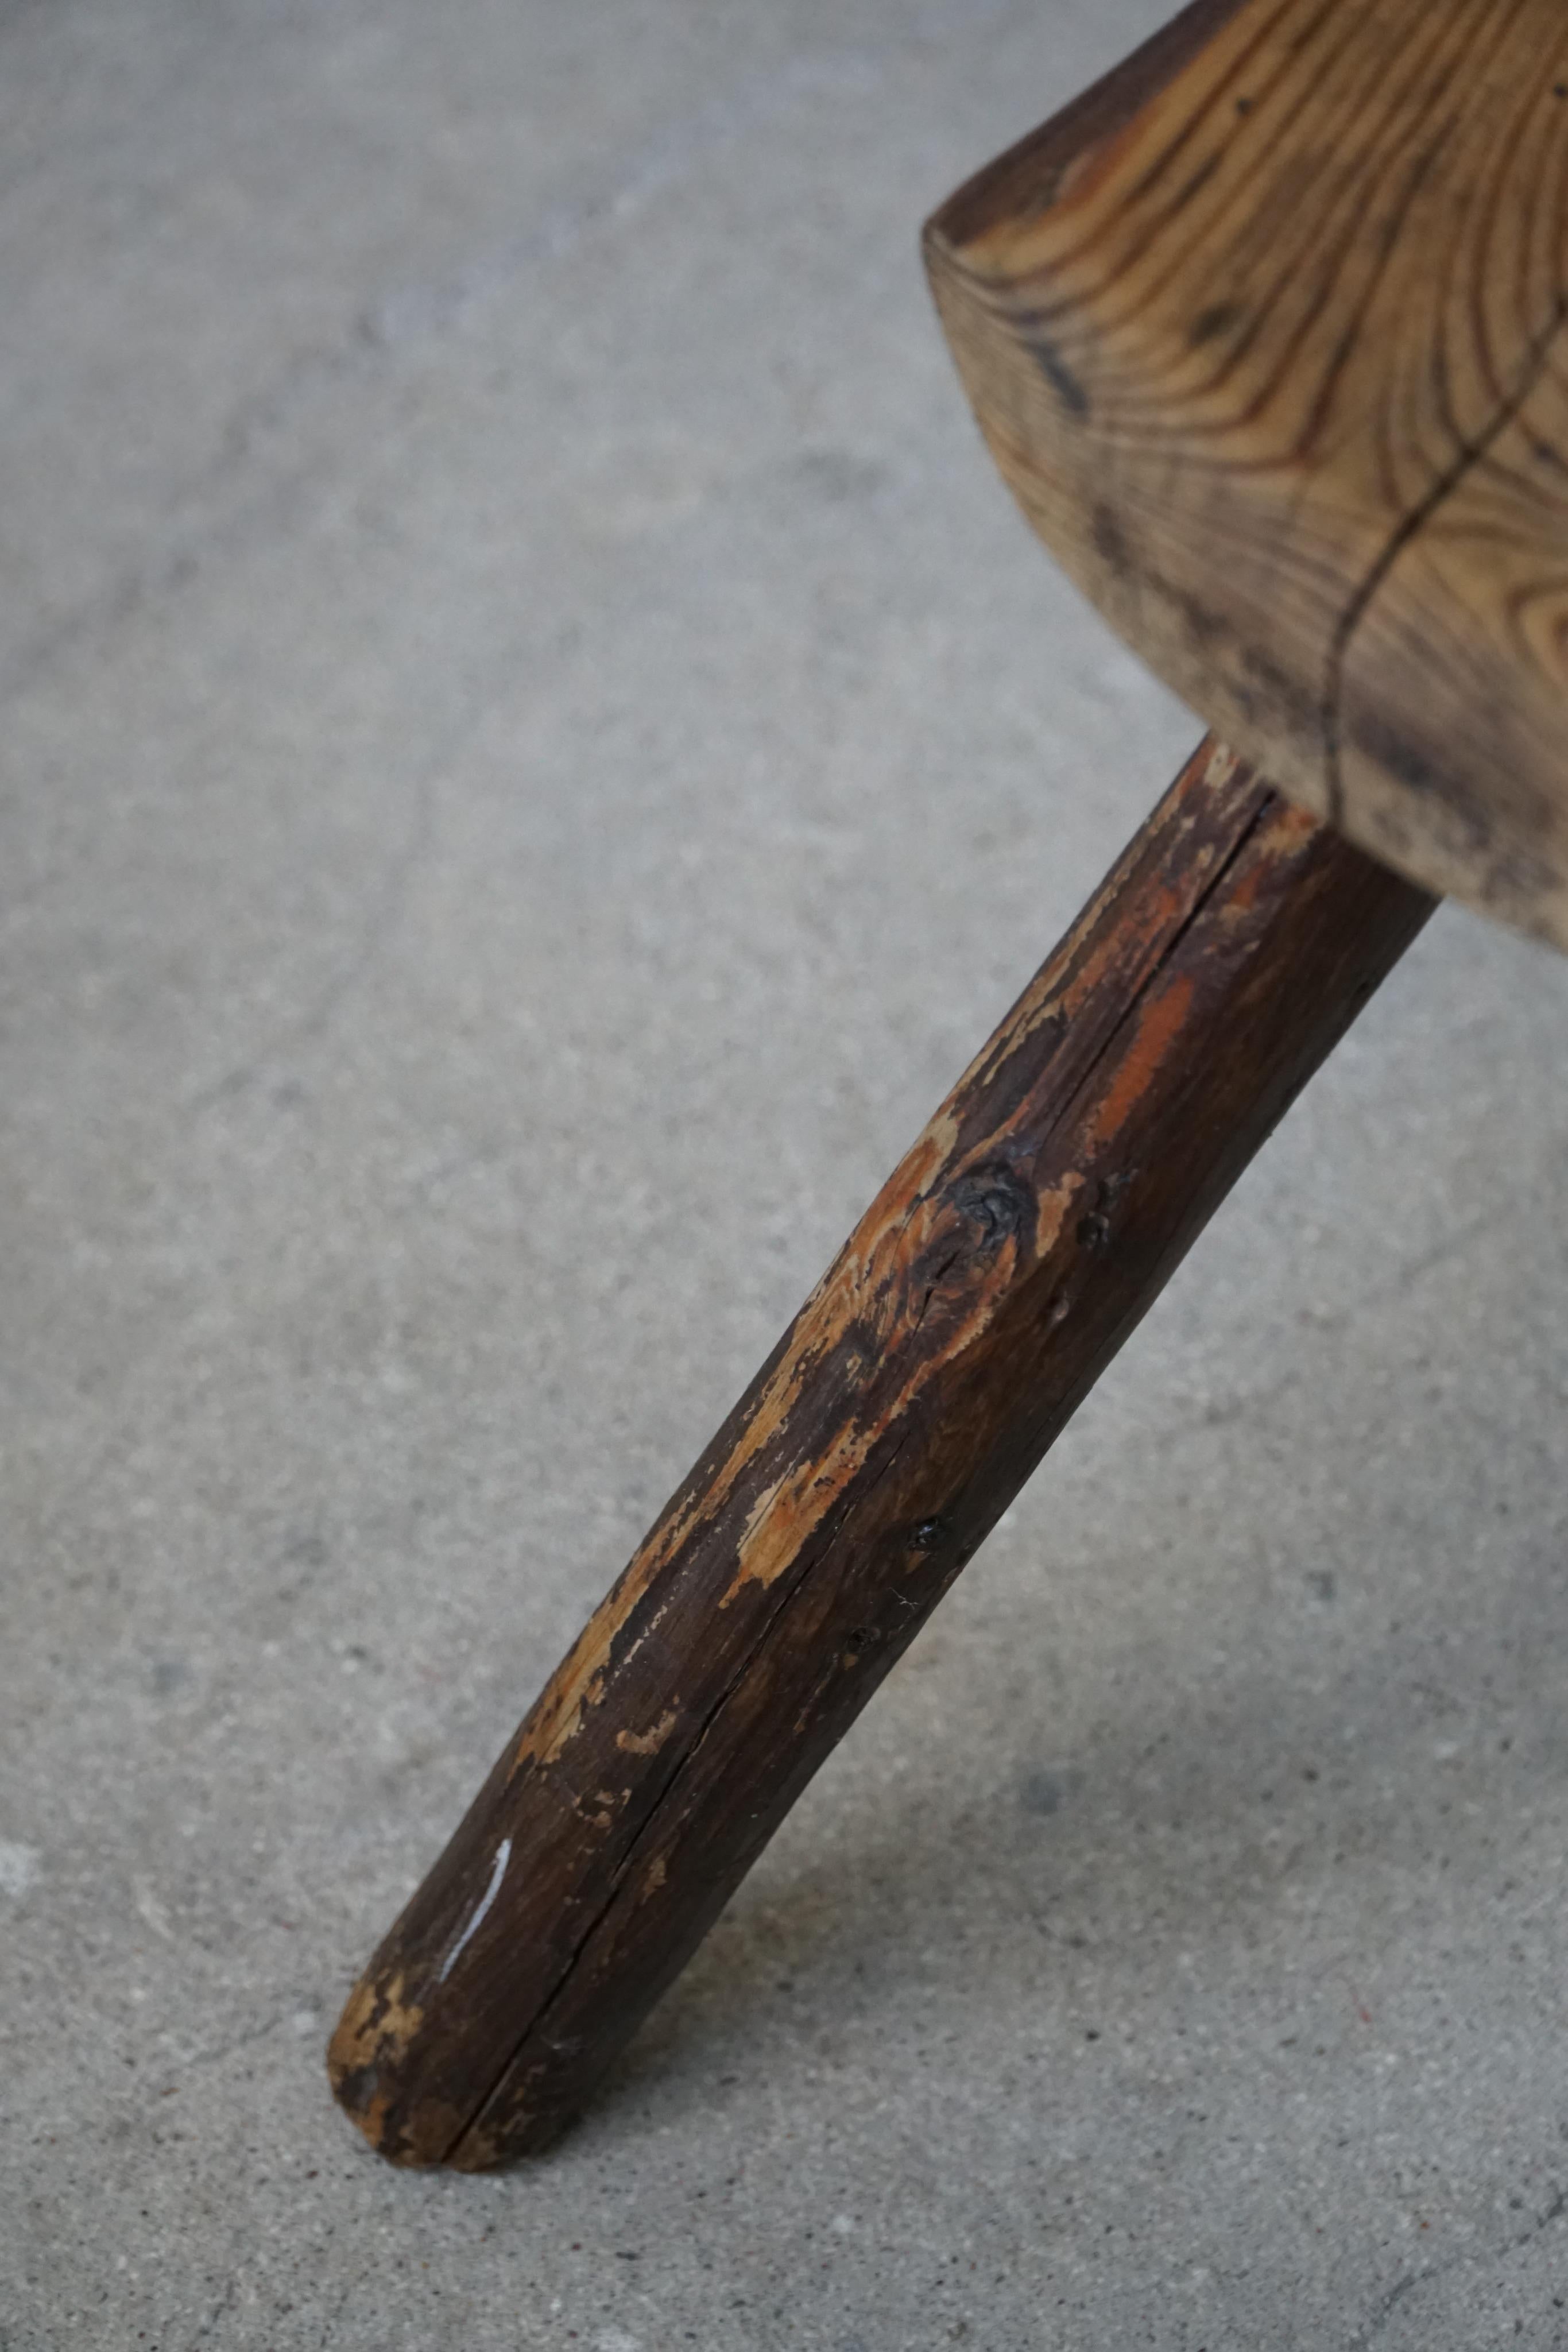 Primitive Wooden Wabi Sabi Bench in Solid Pine, Swedish Carpenter, 1800s In Fair Condition For Sale In Odense, DK